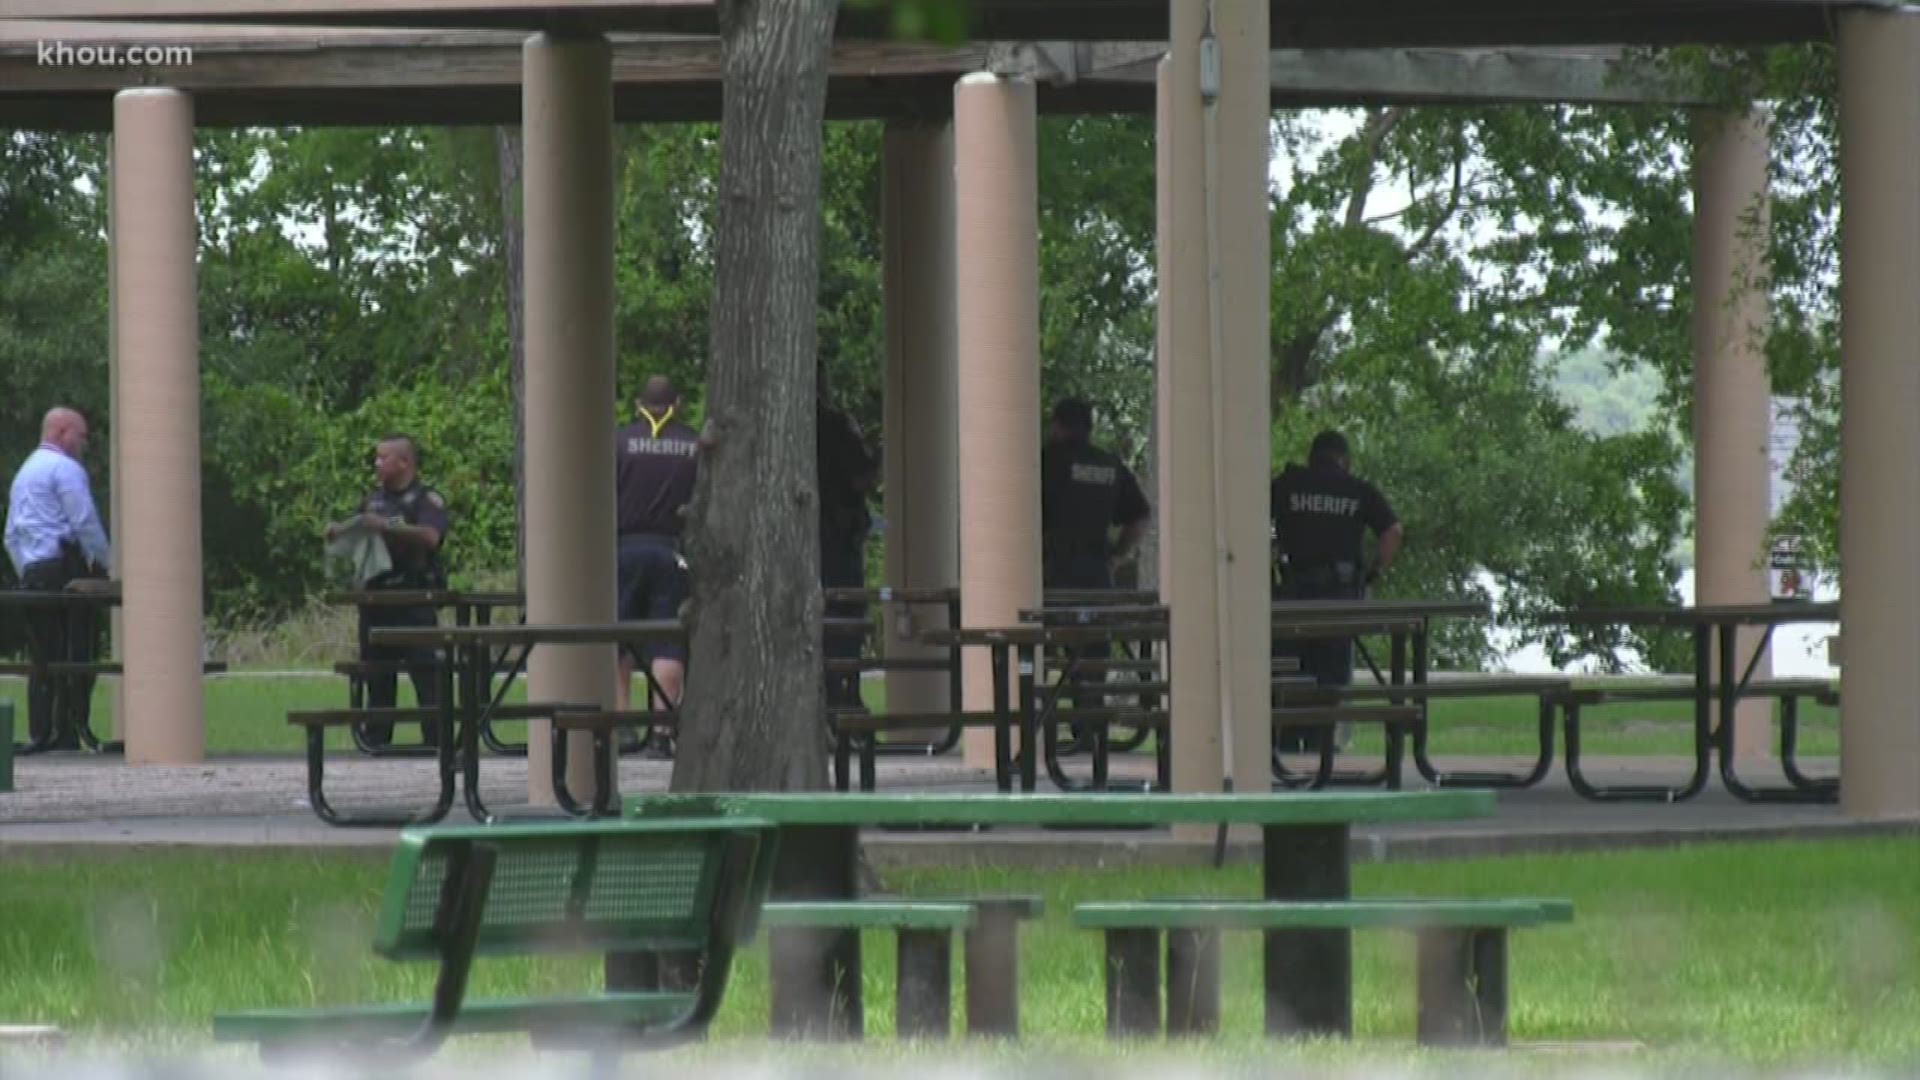 Investigators are trying to find out how a small amount of human bones ended up at a park in Channelview. Someone walking in Moncrief Park on Sunday found what appeared to look like human remains, according to the Harris County Sheriff's Office. Sgt. Dennis Wolfford said there is not a complete skeleton, but "a couple of bones" that appear to be human.